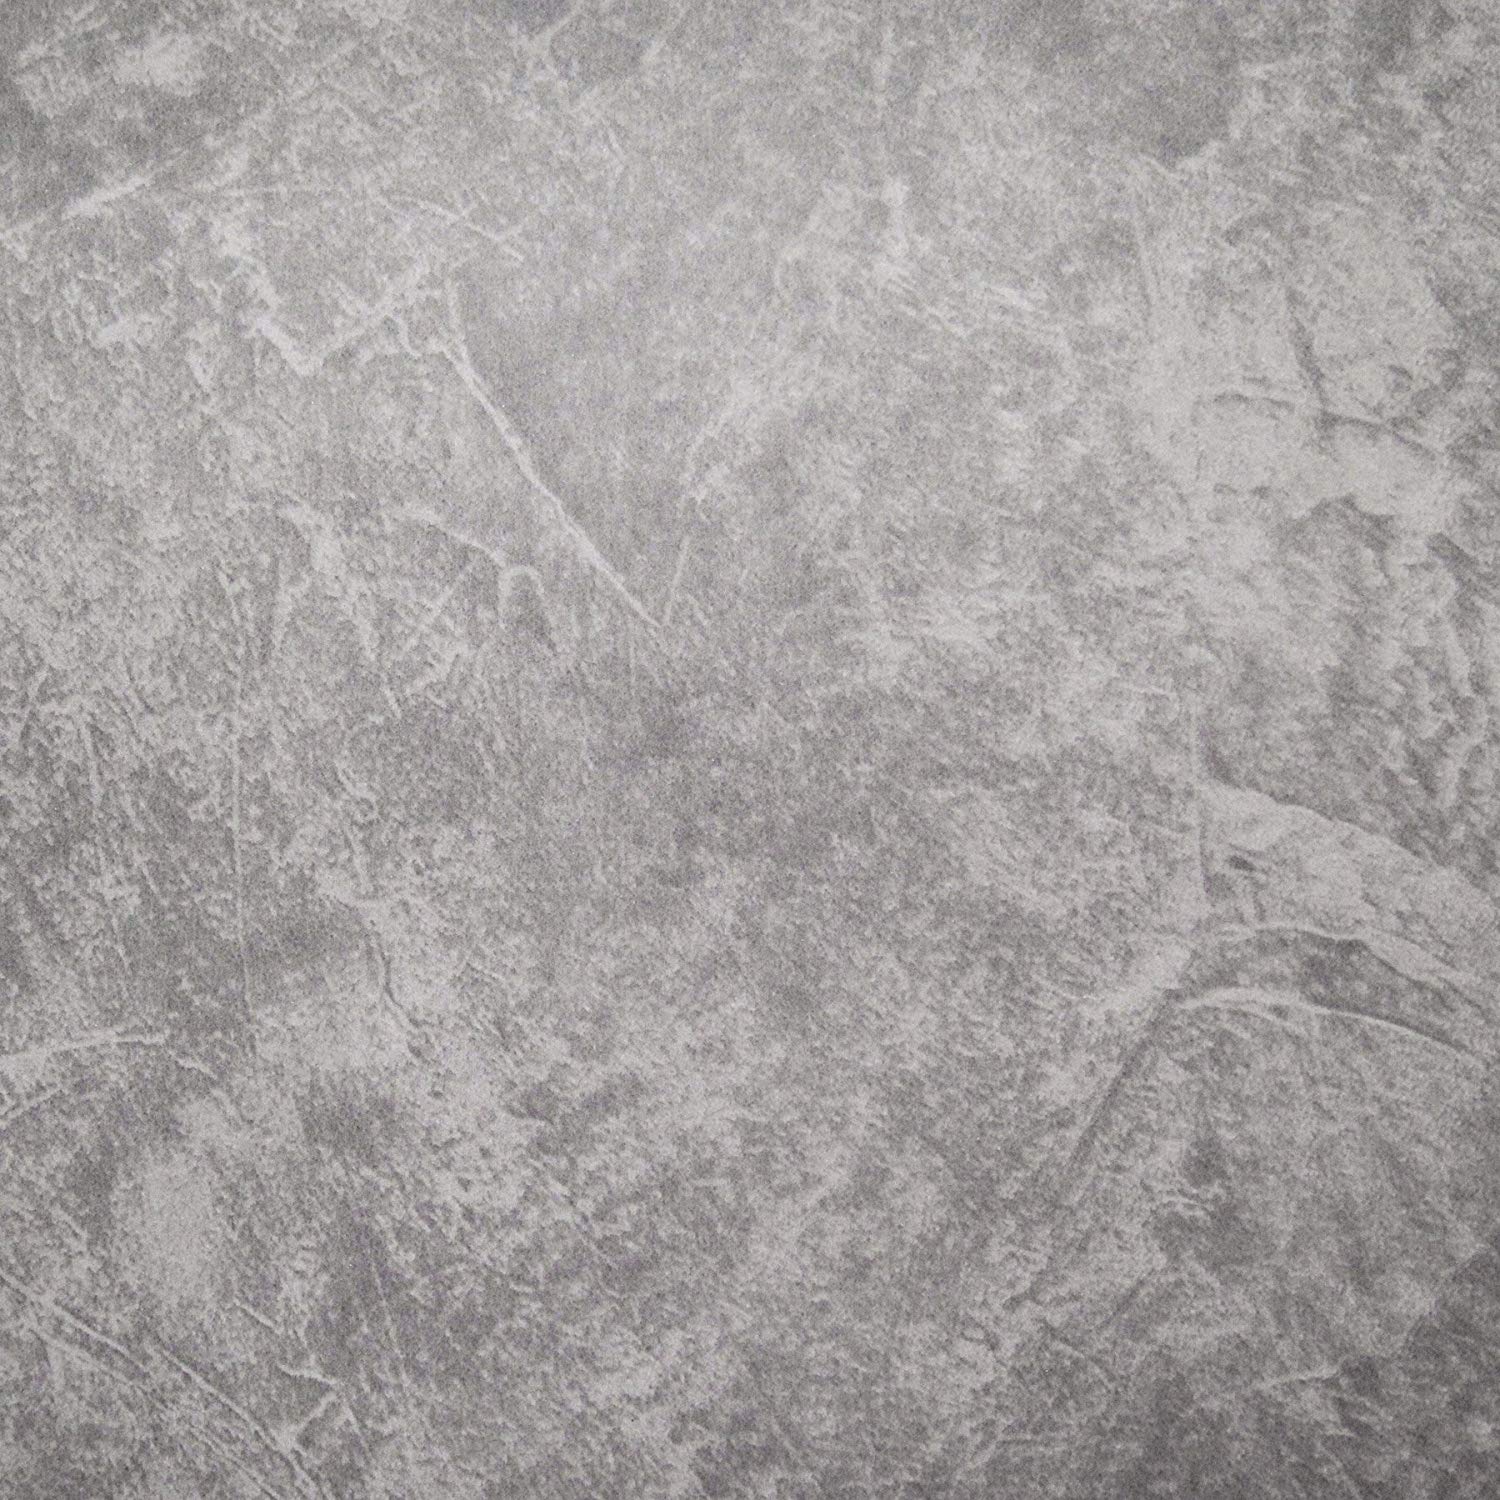 Roll On Concrete Texture - HD Wallpaper 